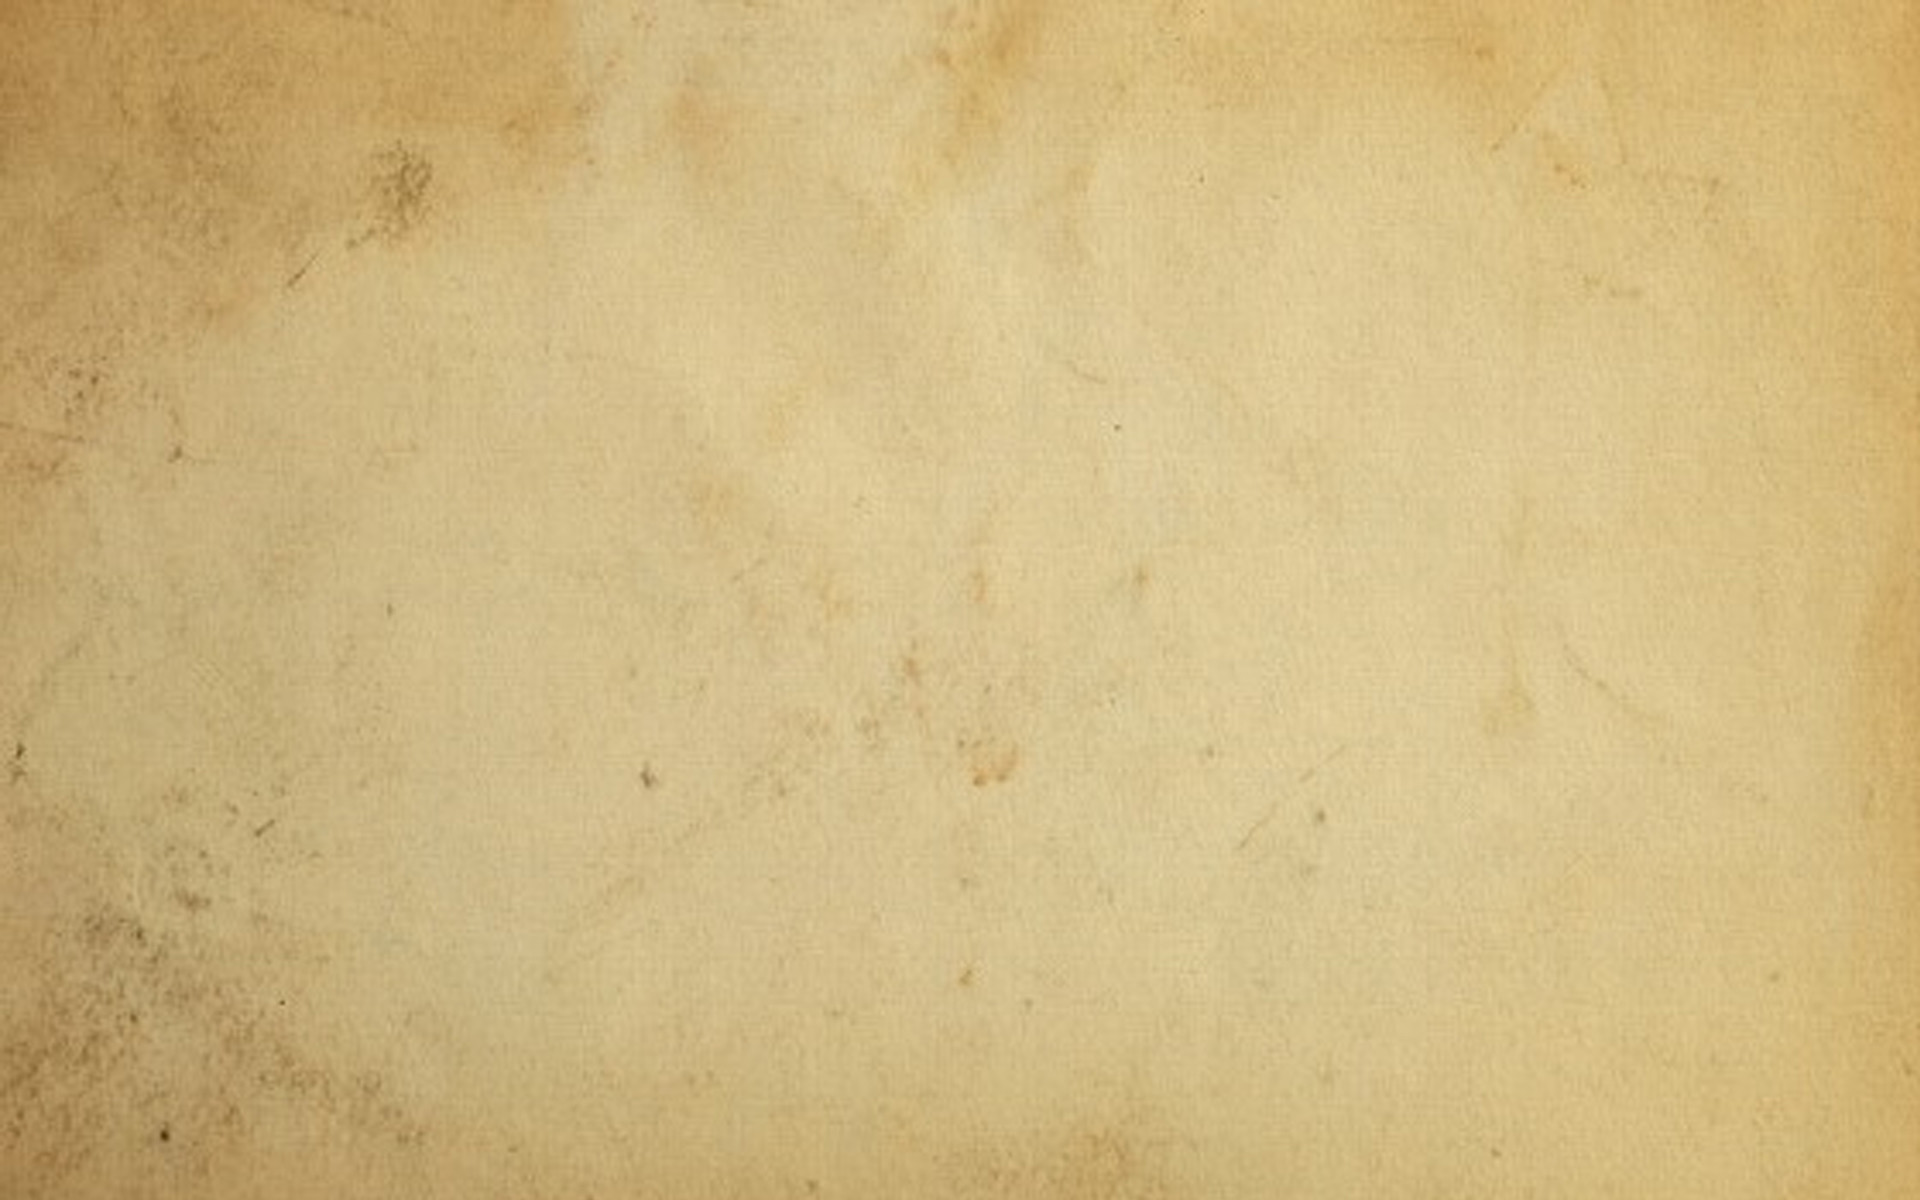 1920x1200 Vintage Newspaper Wallpaper - HD Wallpapers Lovely 0 HTML code. Place the  image in the document on top of the other layers. After that .